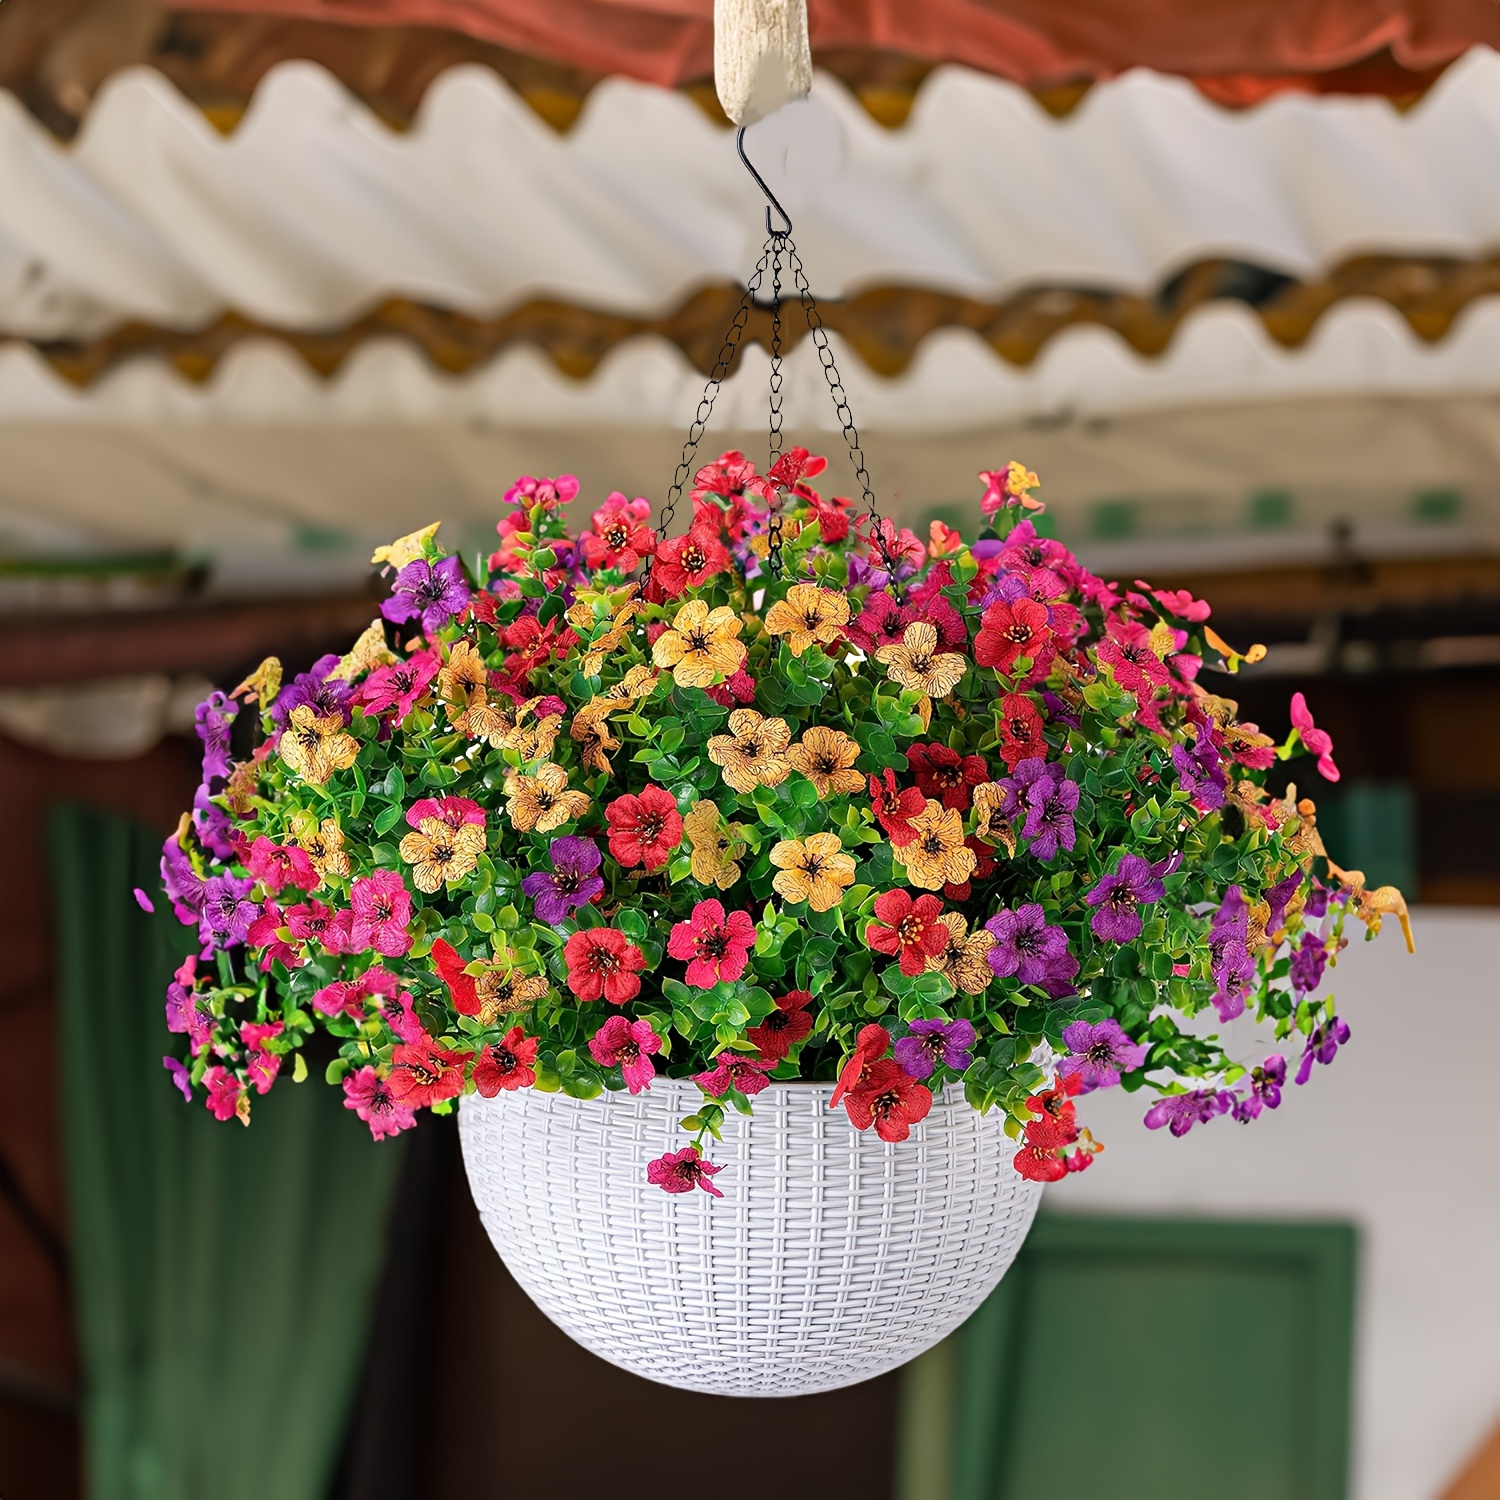 

Set, Fake Hanging Flowers With 7.9in Basket - Outdoor/indoor Patio Lawn Decor, Artificial Hanging Plants For Wall, Home, Room, Indoor, Outdoor, Office Decor, Thanksgiving, Christmas Decoration